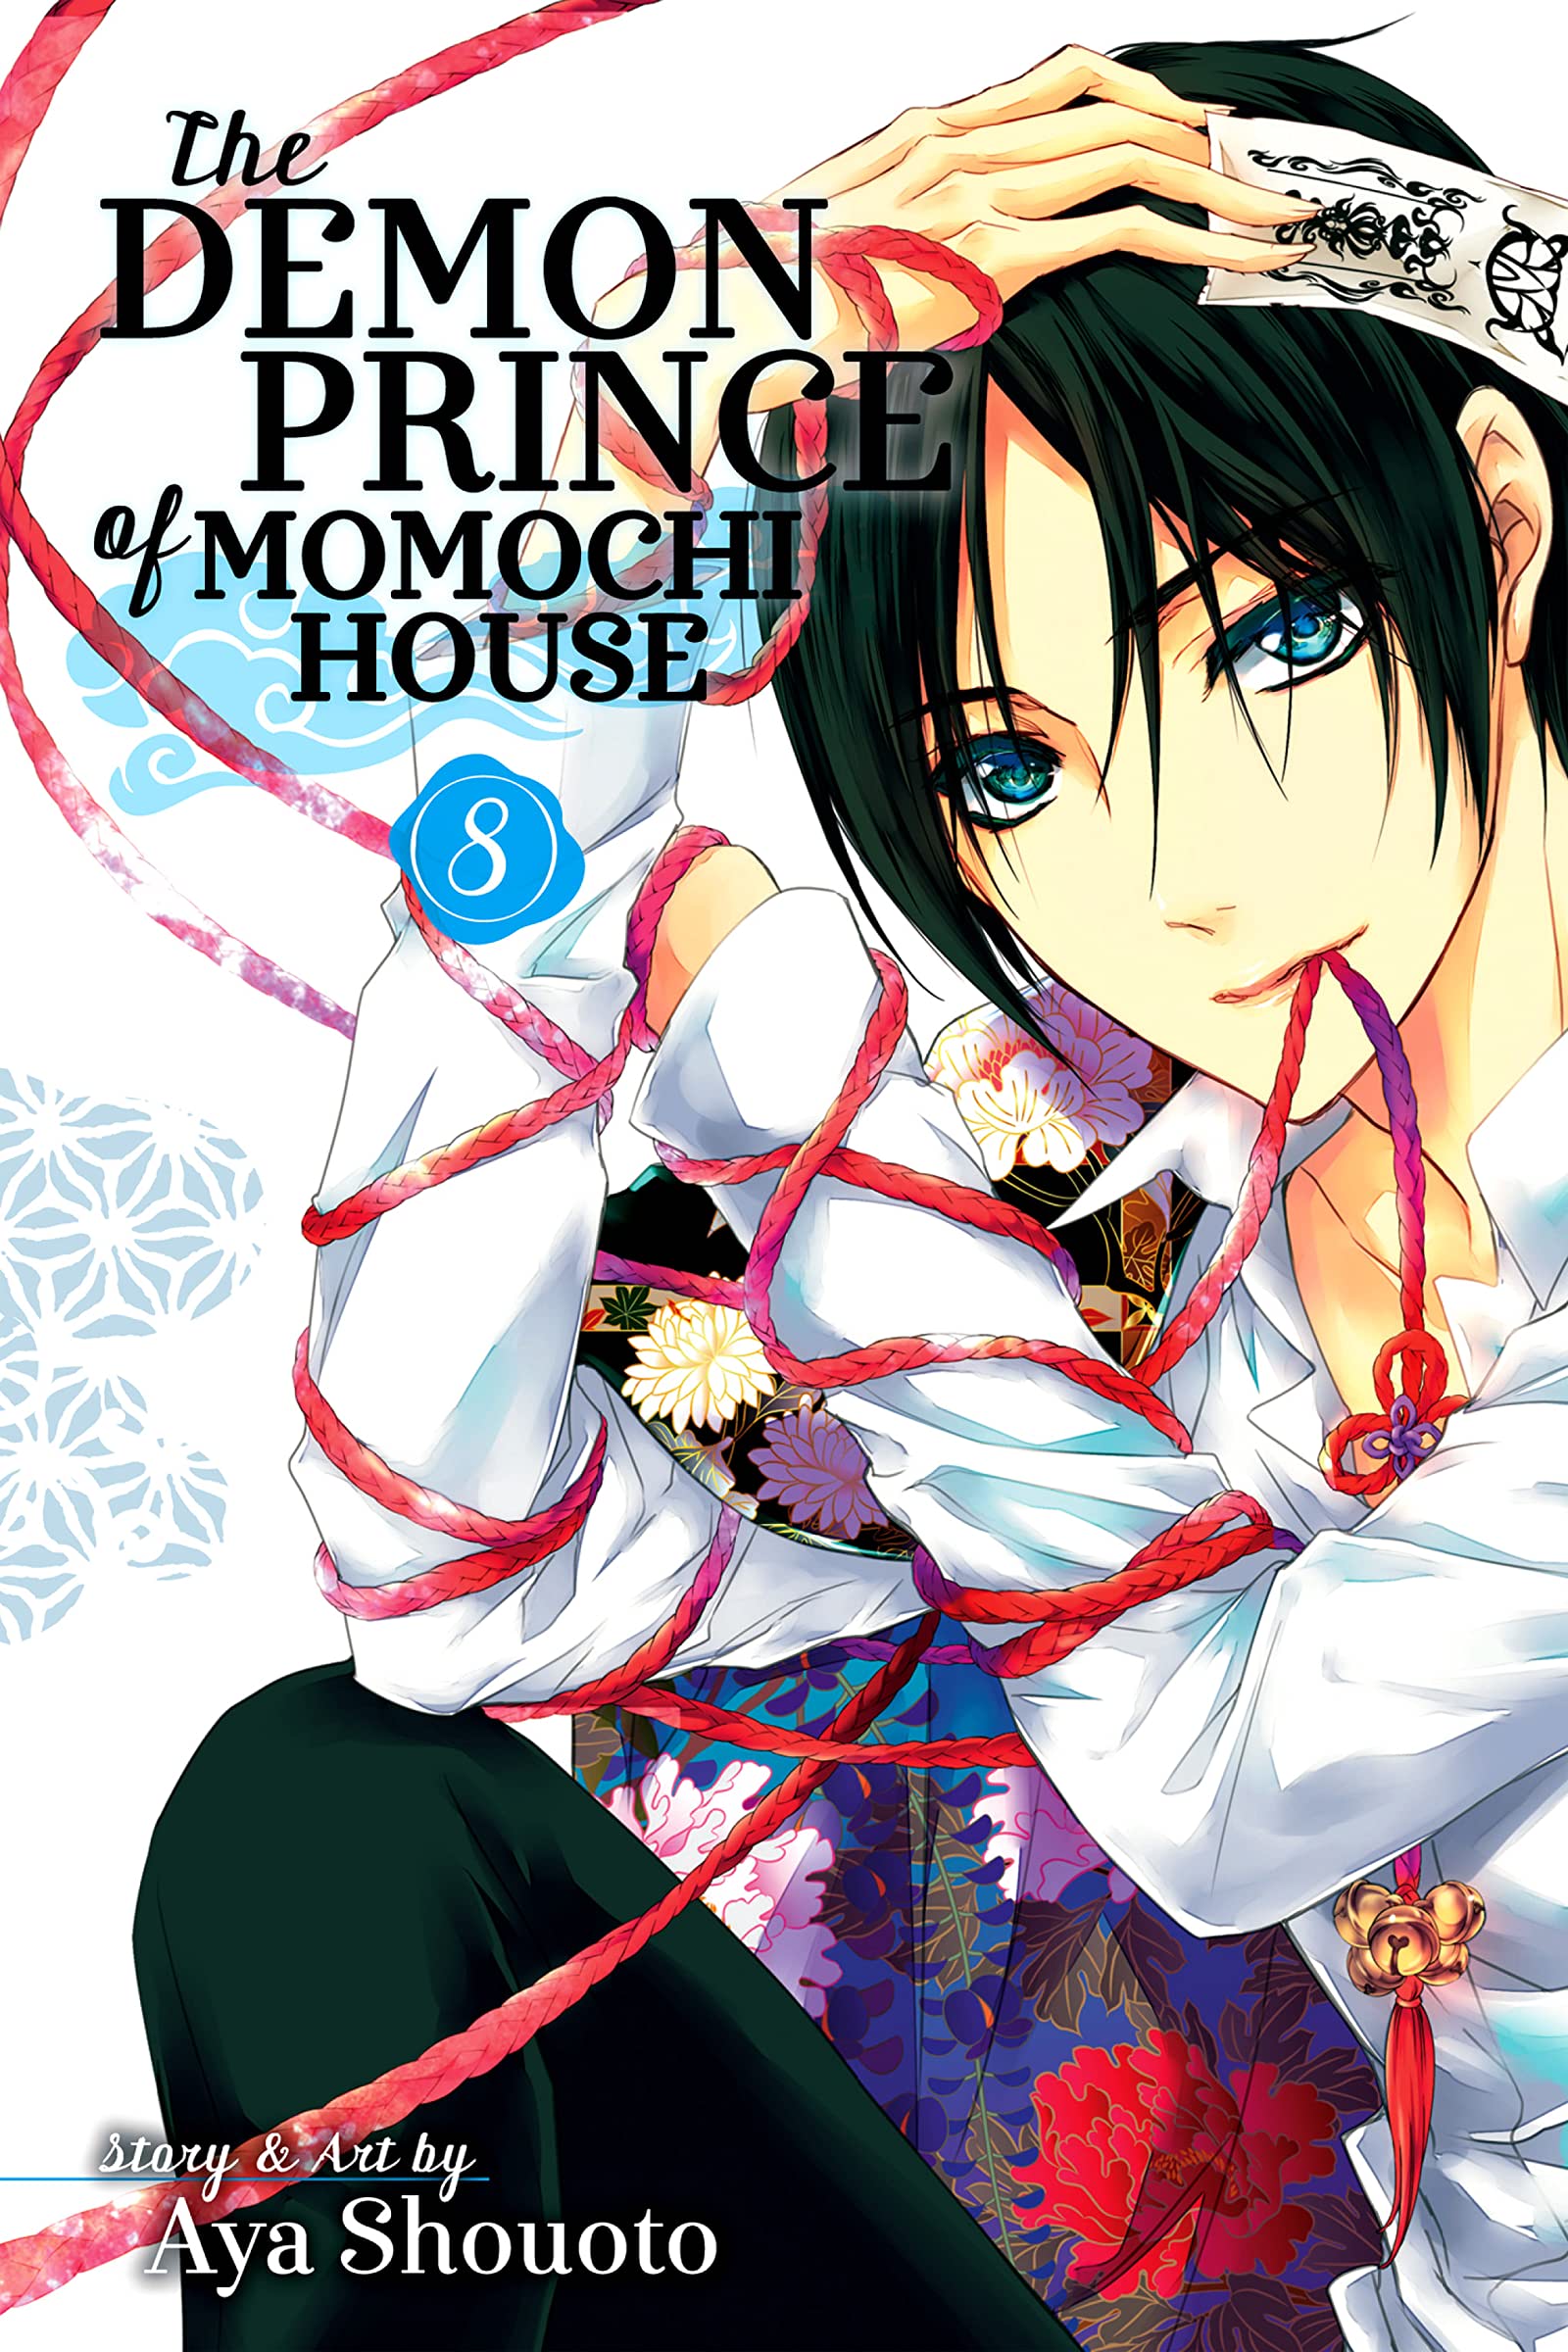 The Demon Prince of Momochi House - Volume 8